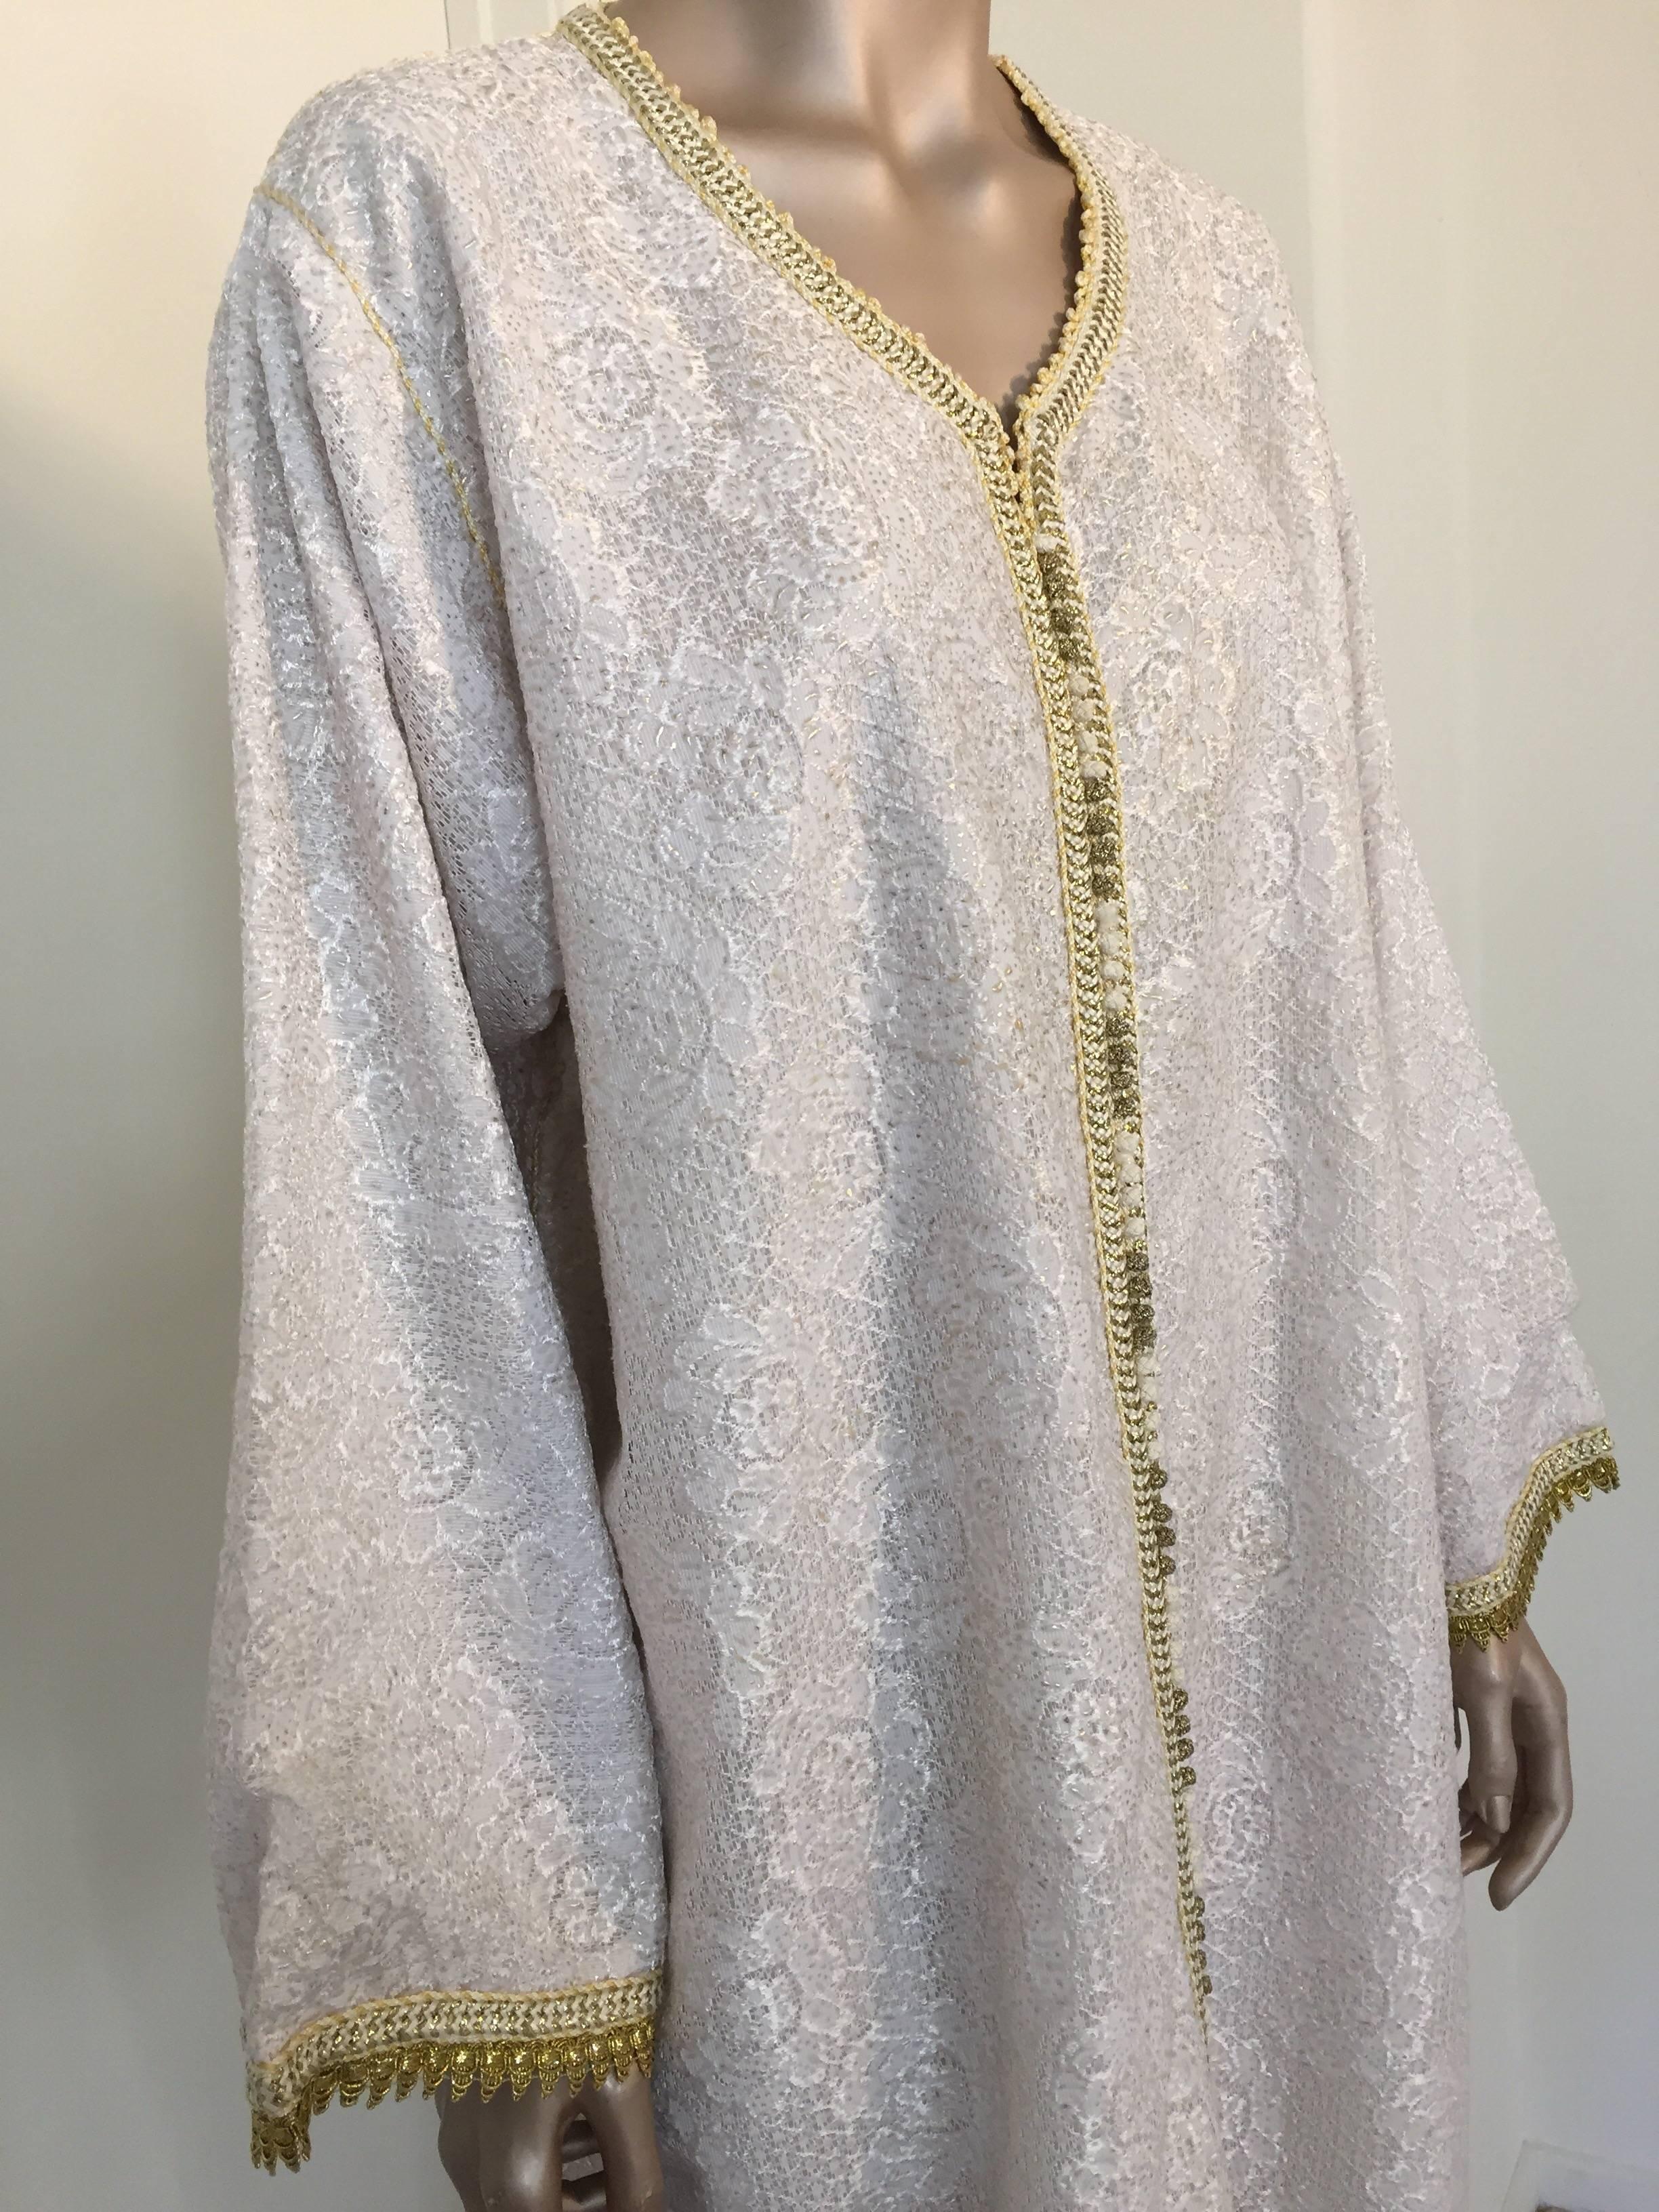 20th Century Moroccan Vintage Caftan in White and Gold Lace 1970s Kaftan Maxi Dress Large For Sale